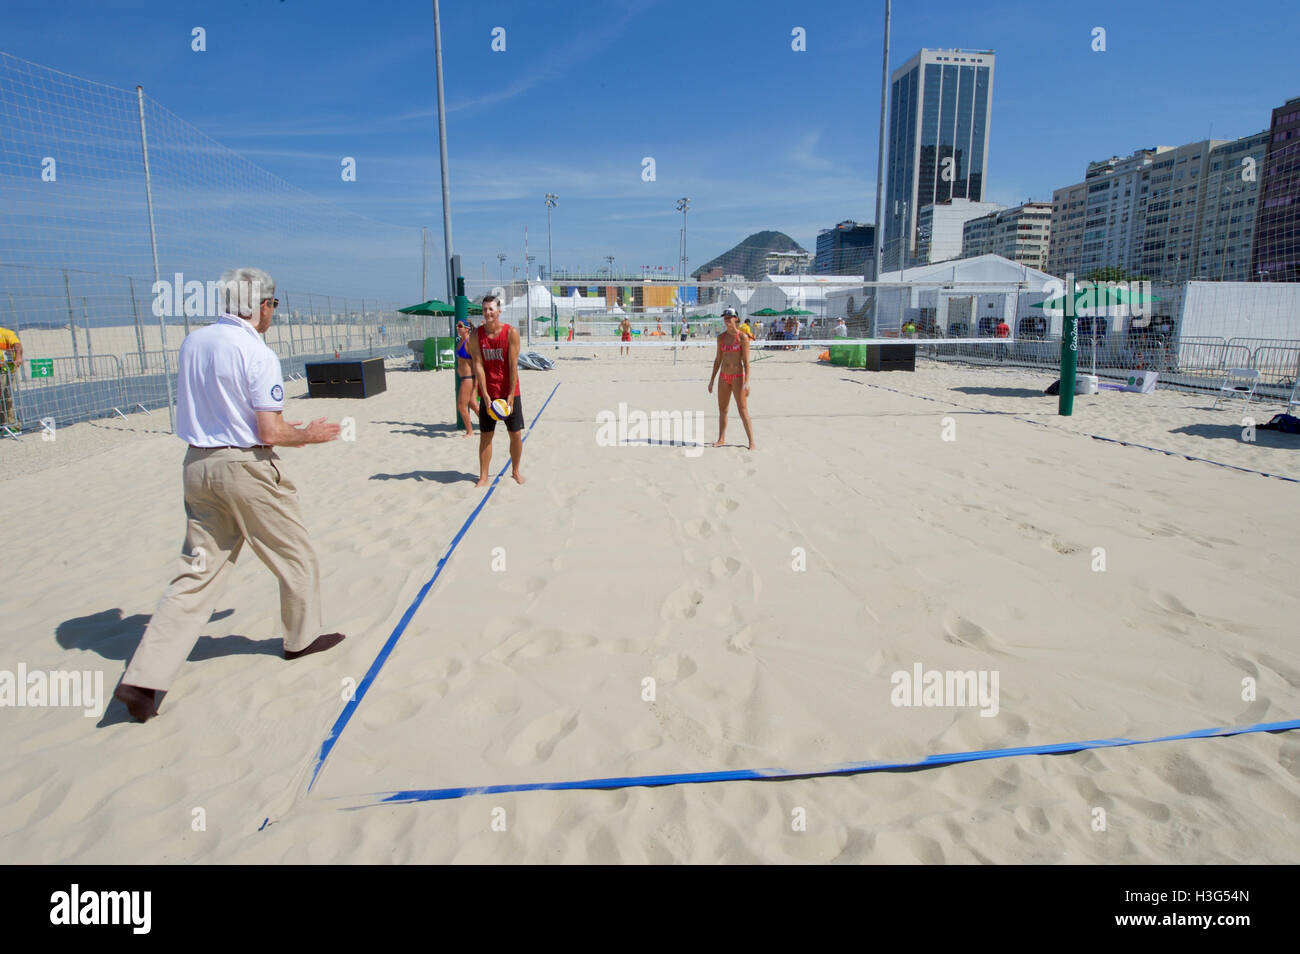 U.S. Secretary of State John Kerry prepares to play with U.S. Olympic women's beach volleyball players on the Copacobana beach in Rio de Janiero, Brazil, on August 6, 2016, as he and his fellow members of the U.S. Presidential Delegation attend the Summer Olympics. Stock Photo